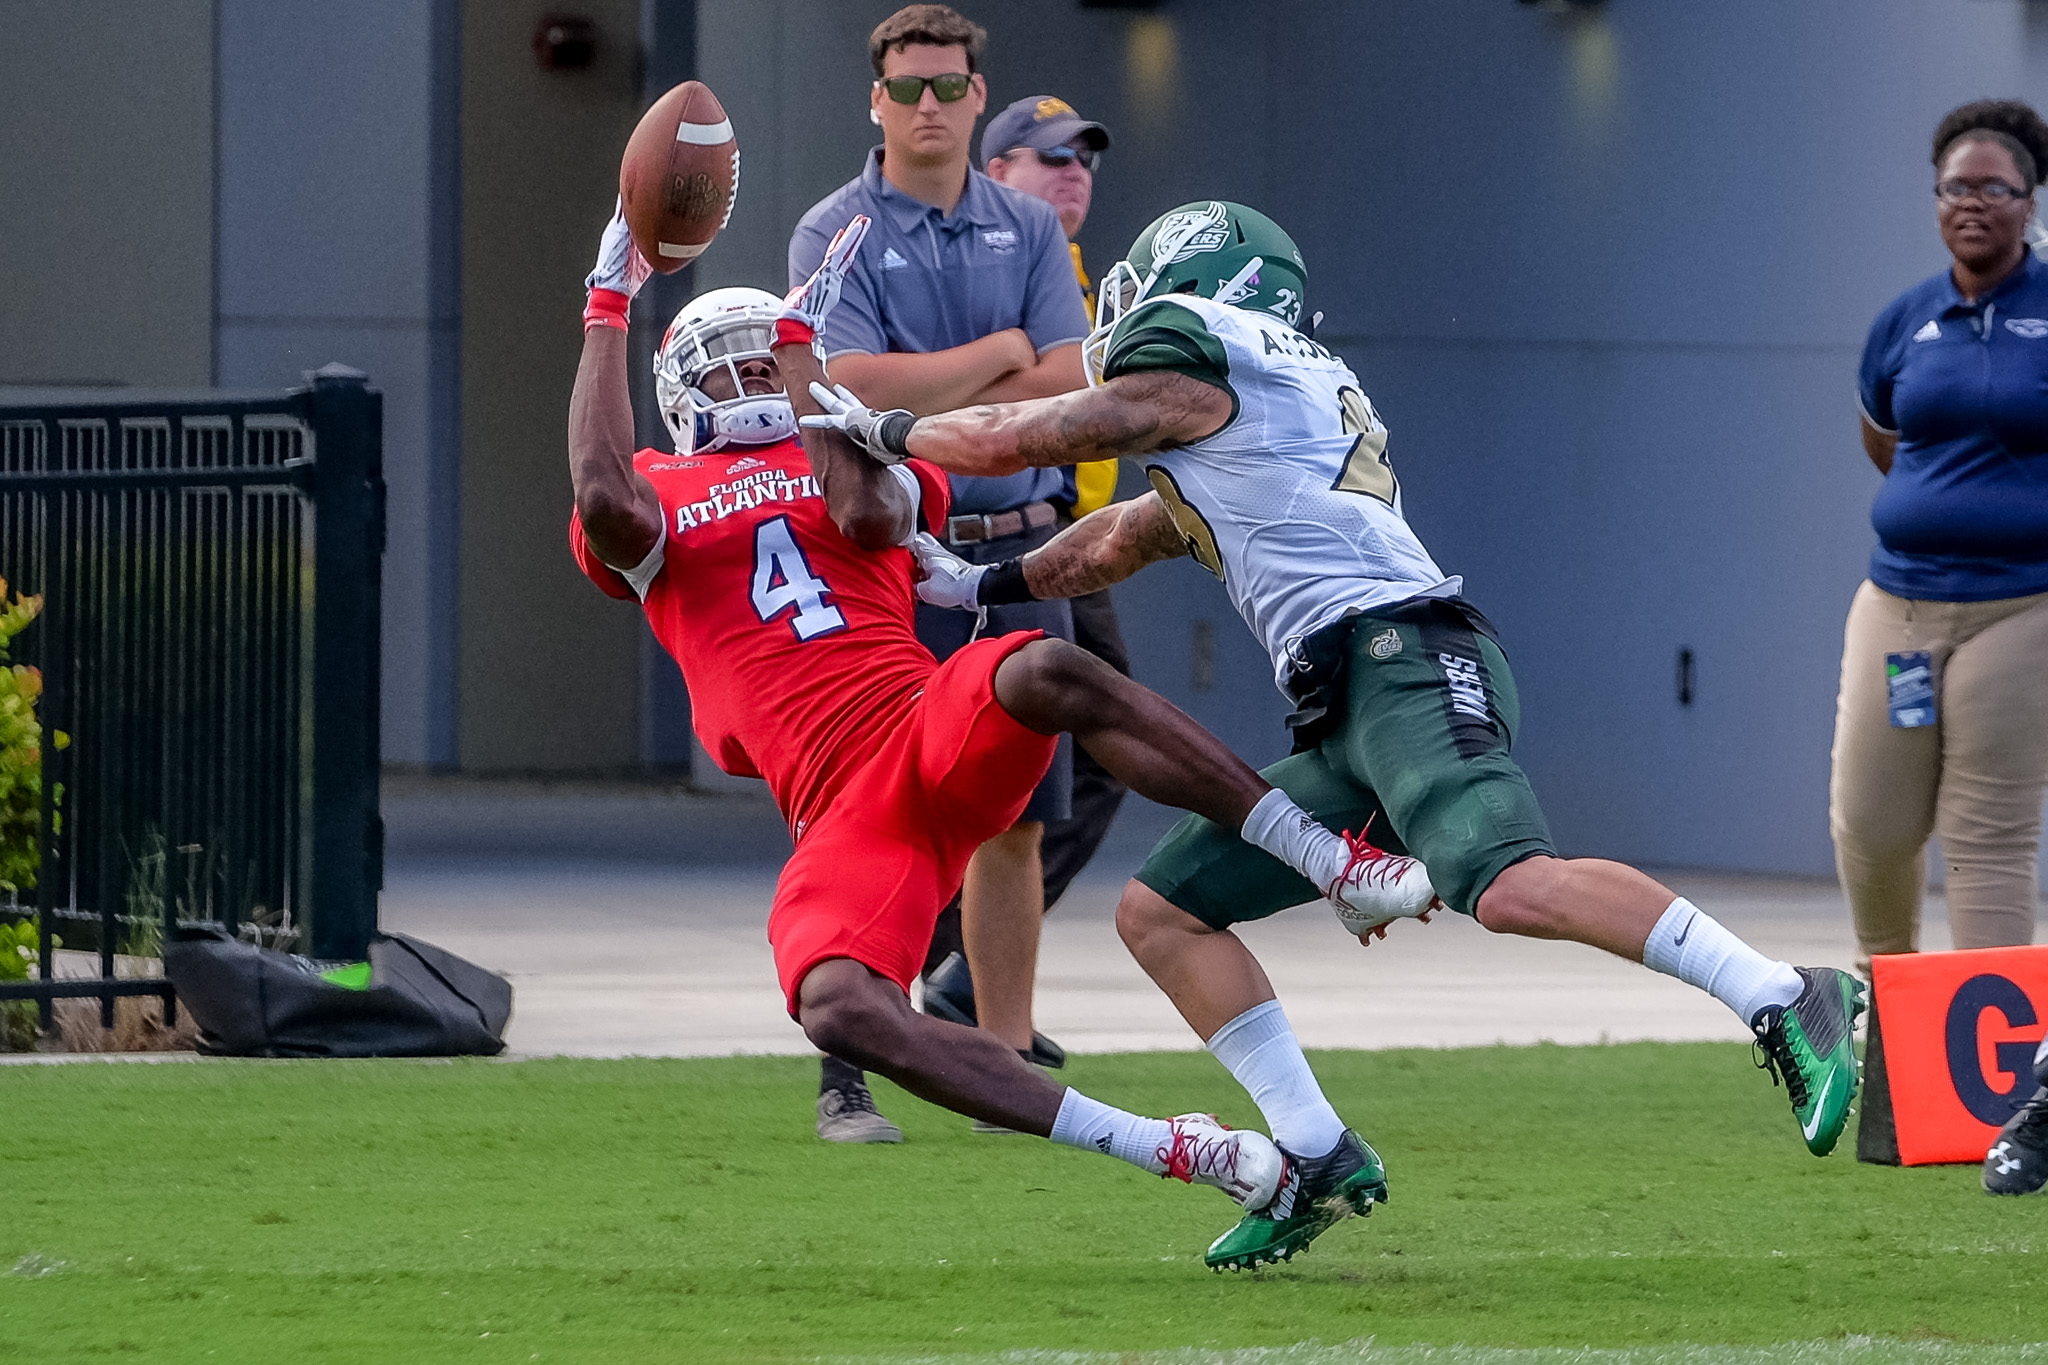 On the second to last play of the game, FAU redshirt junior wide receiver Kalib Woods (4) misses a catch from quarterback Jason Driskel.